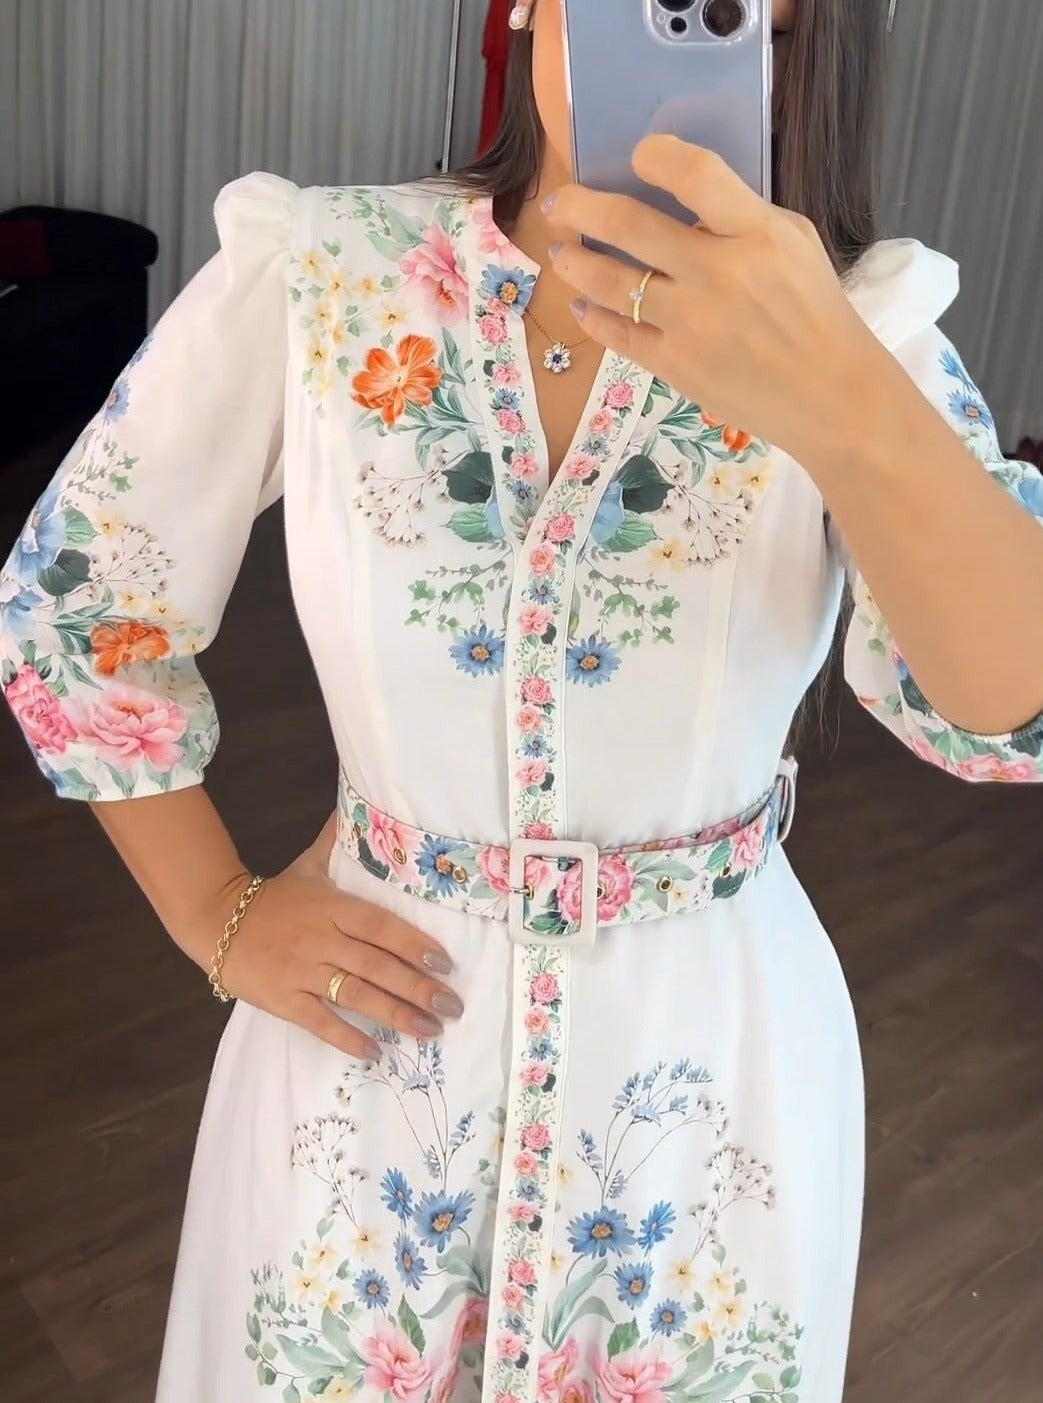 Romantic floral belted dress